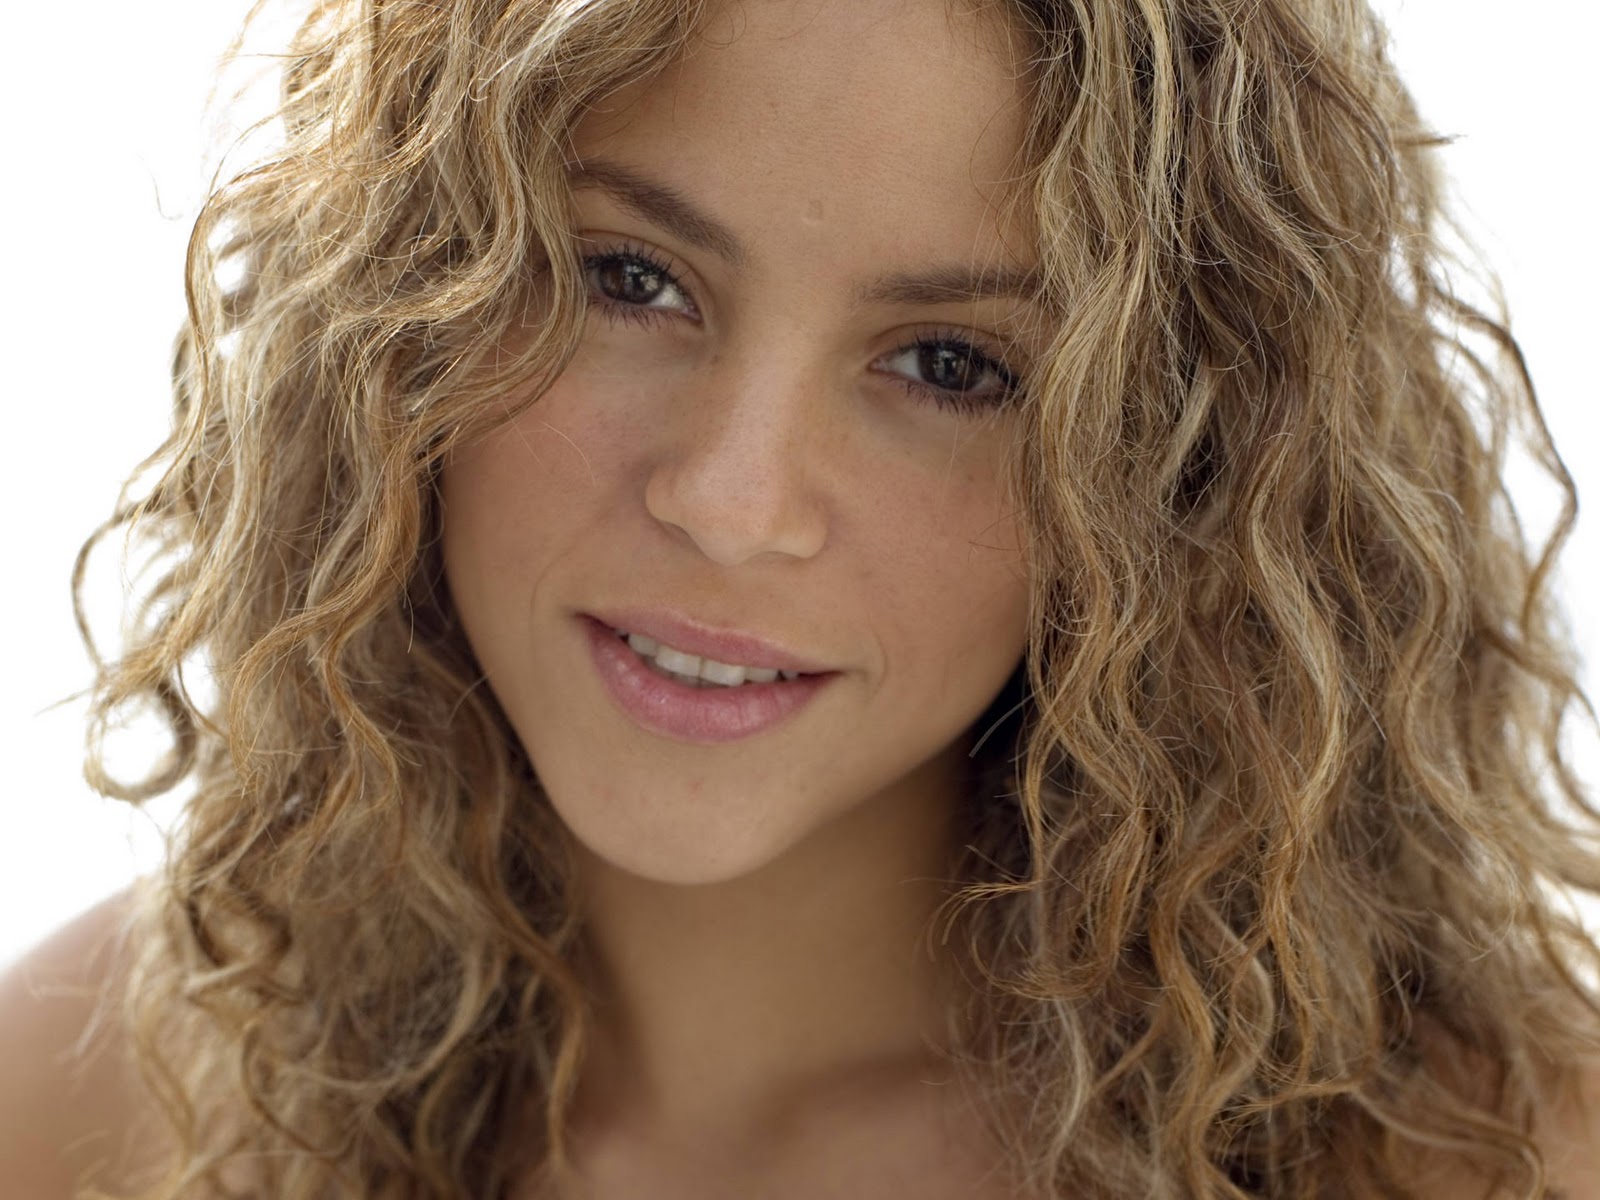 world picture gallery: shakira hot and beautiful wallpapers1600 x 1200